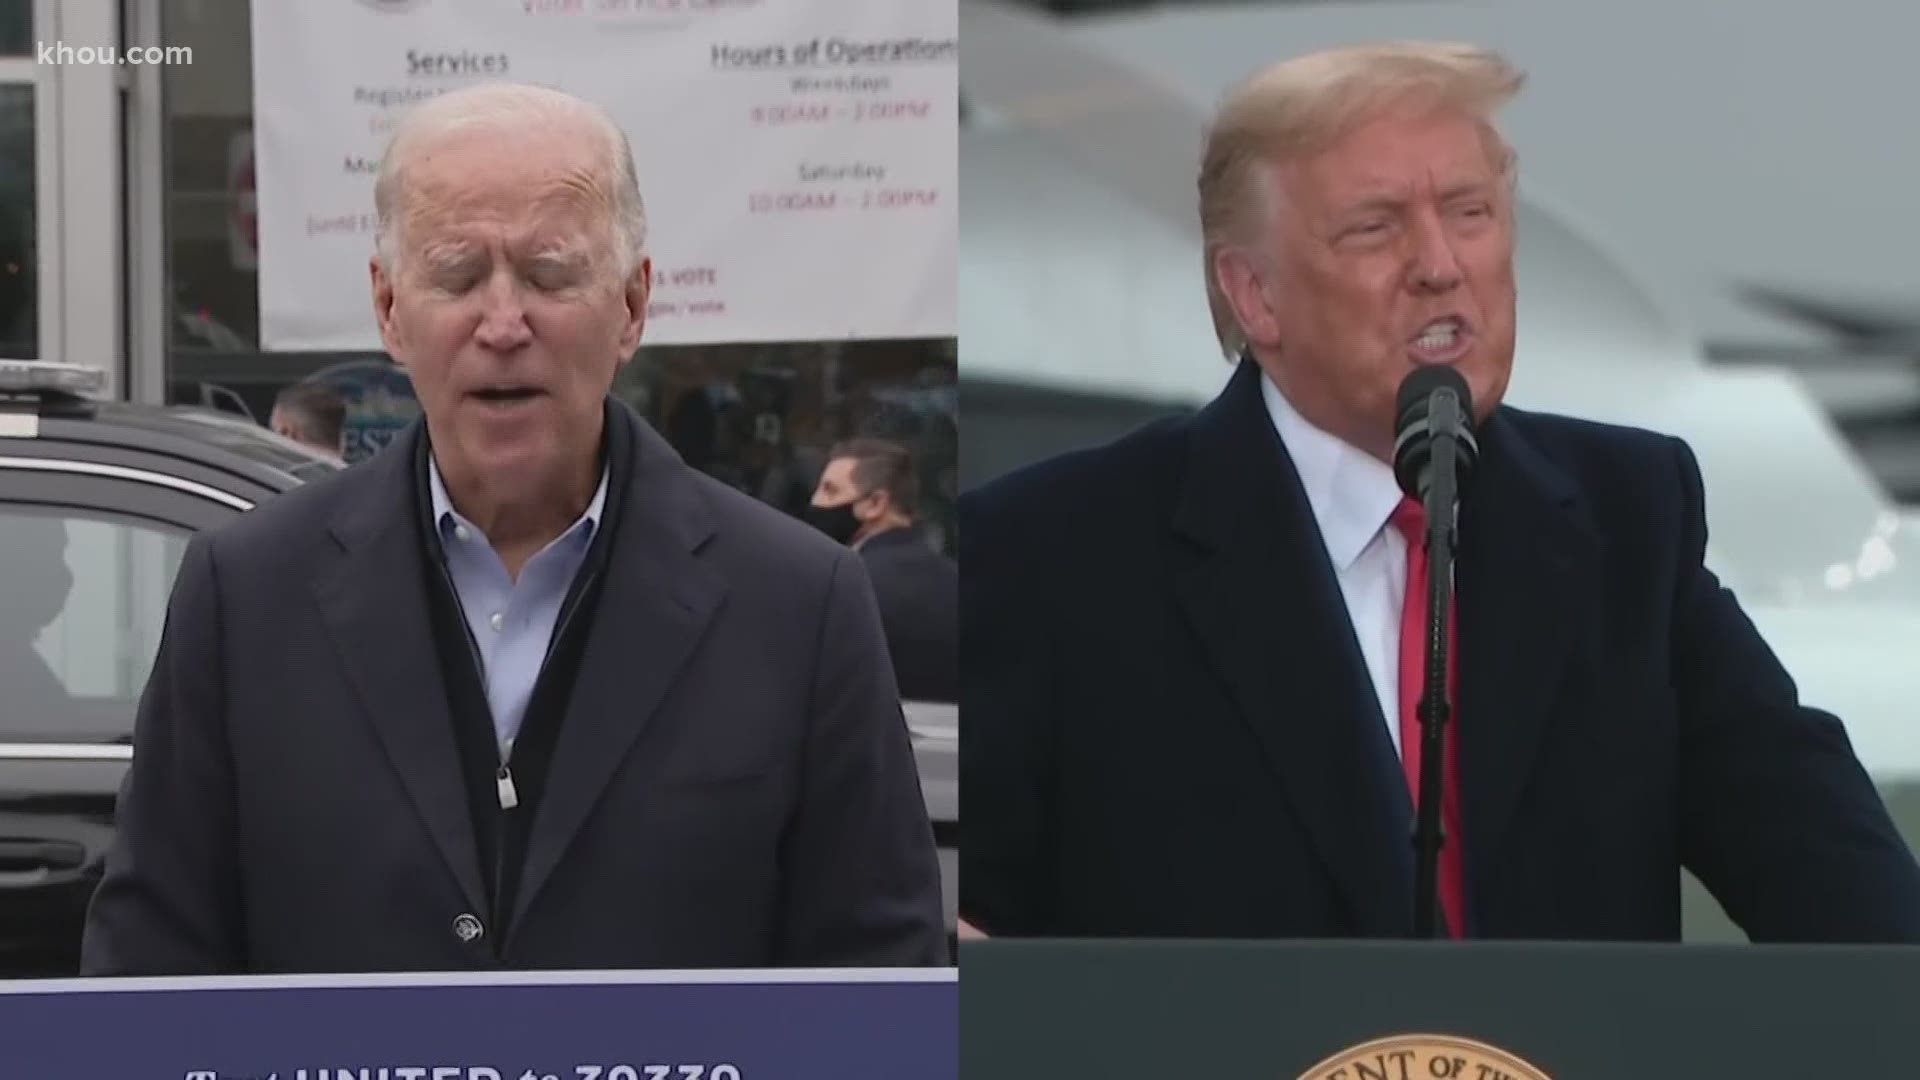 A day after one poll showed Joe Biden up 3 points, new polling shows President Donald Trump with a narrow lead with eight days to go until Election Day.